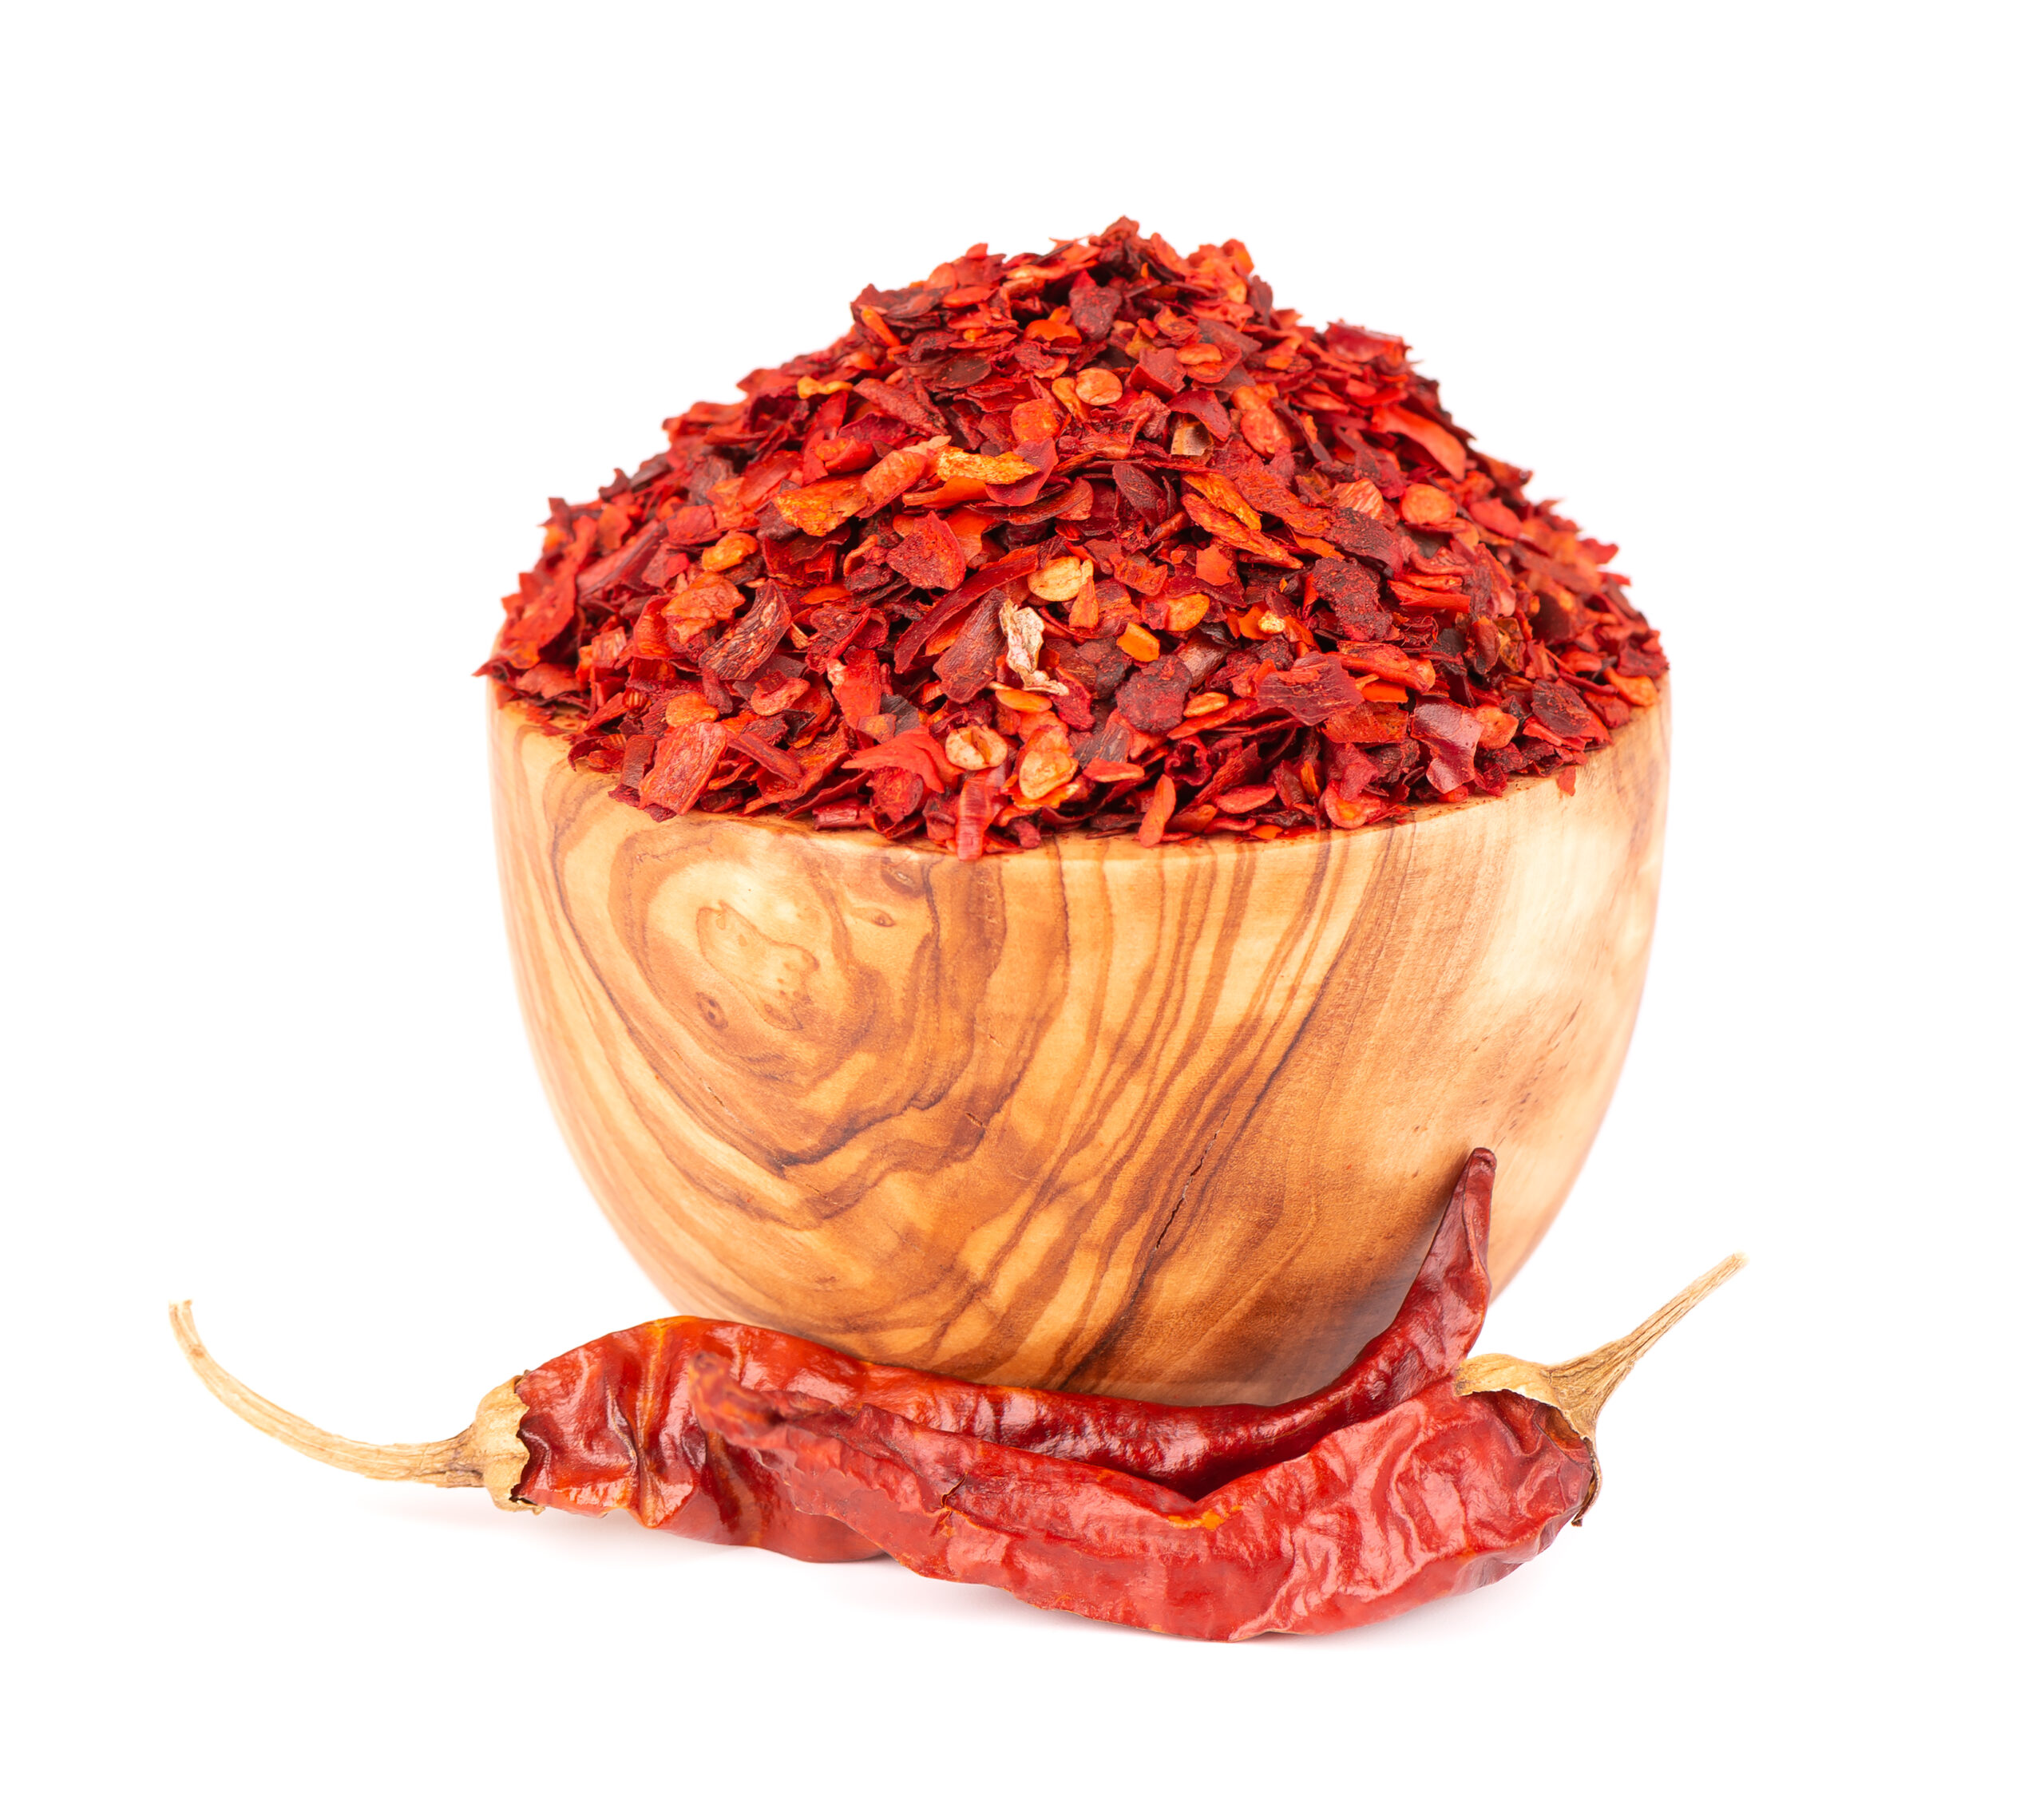 Substitutes for Red Chili Flakes